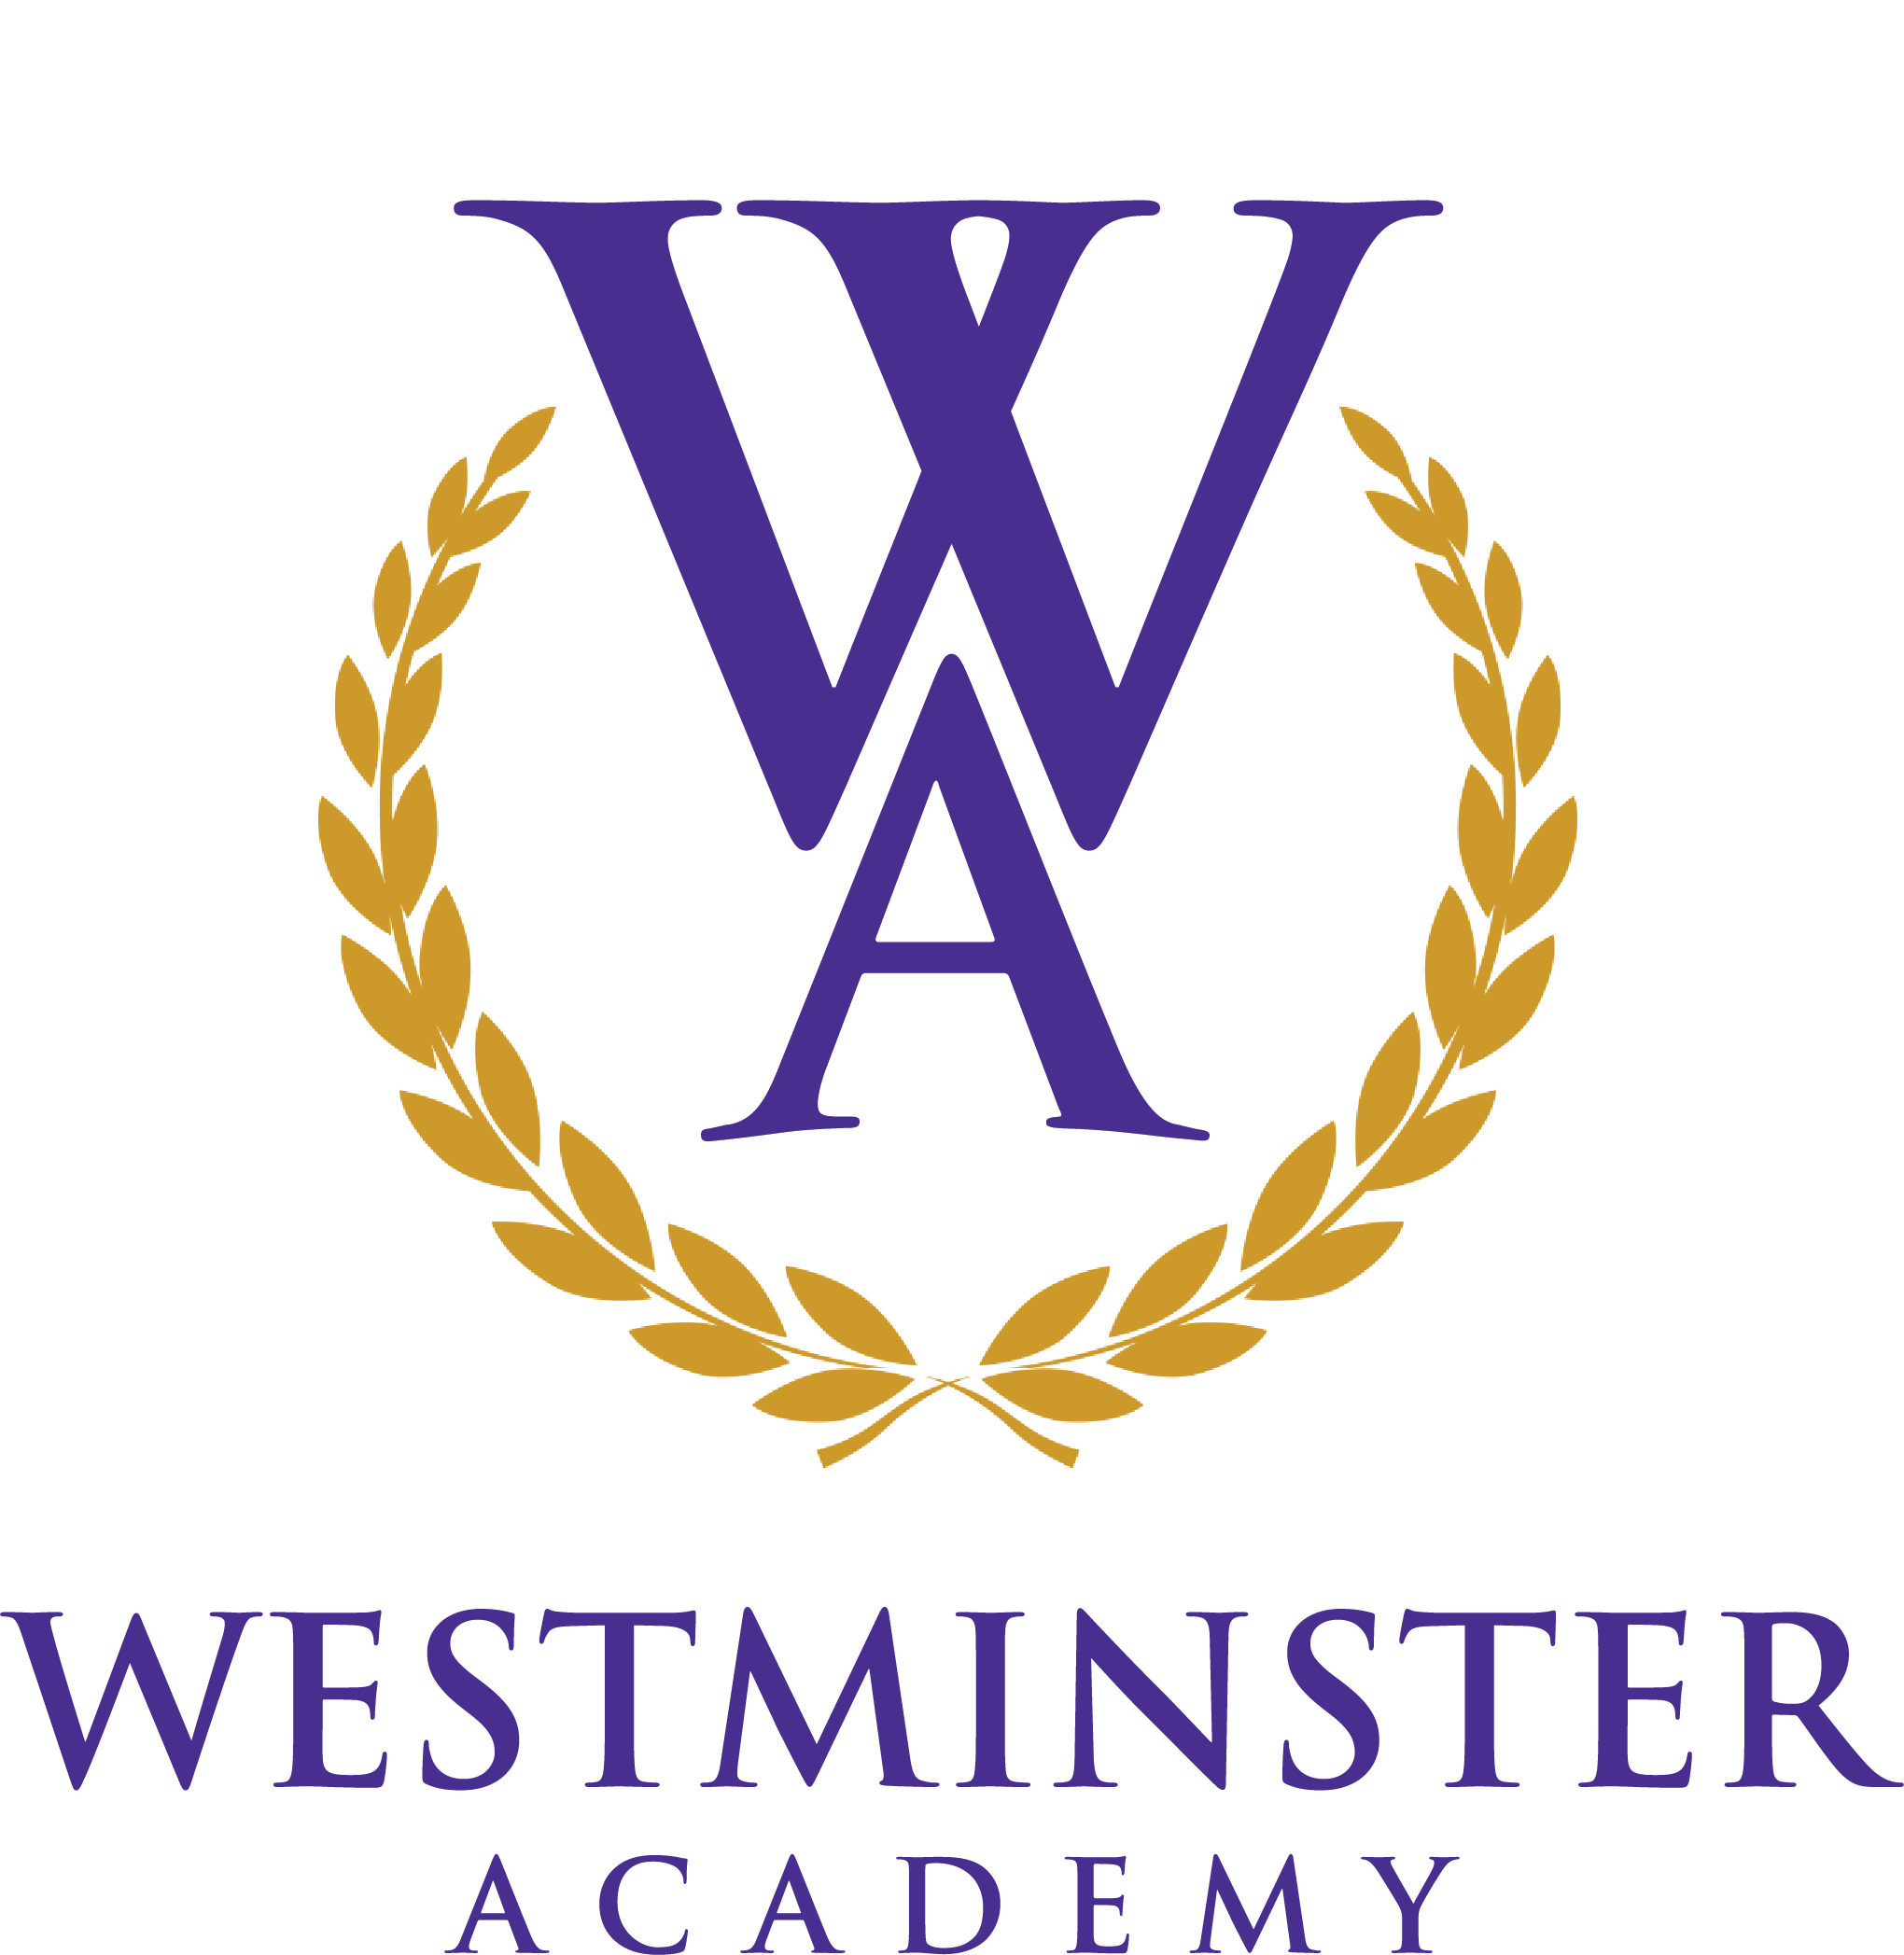 Why Westminster